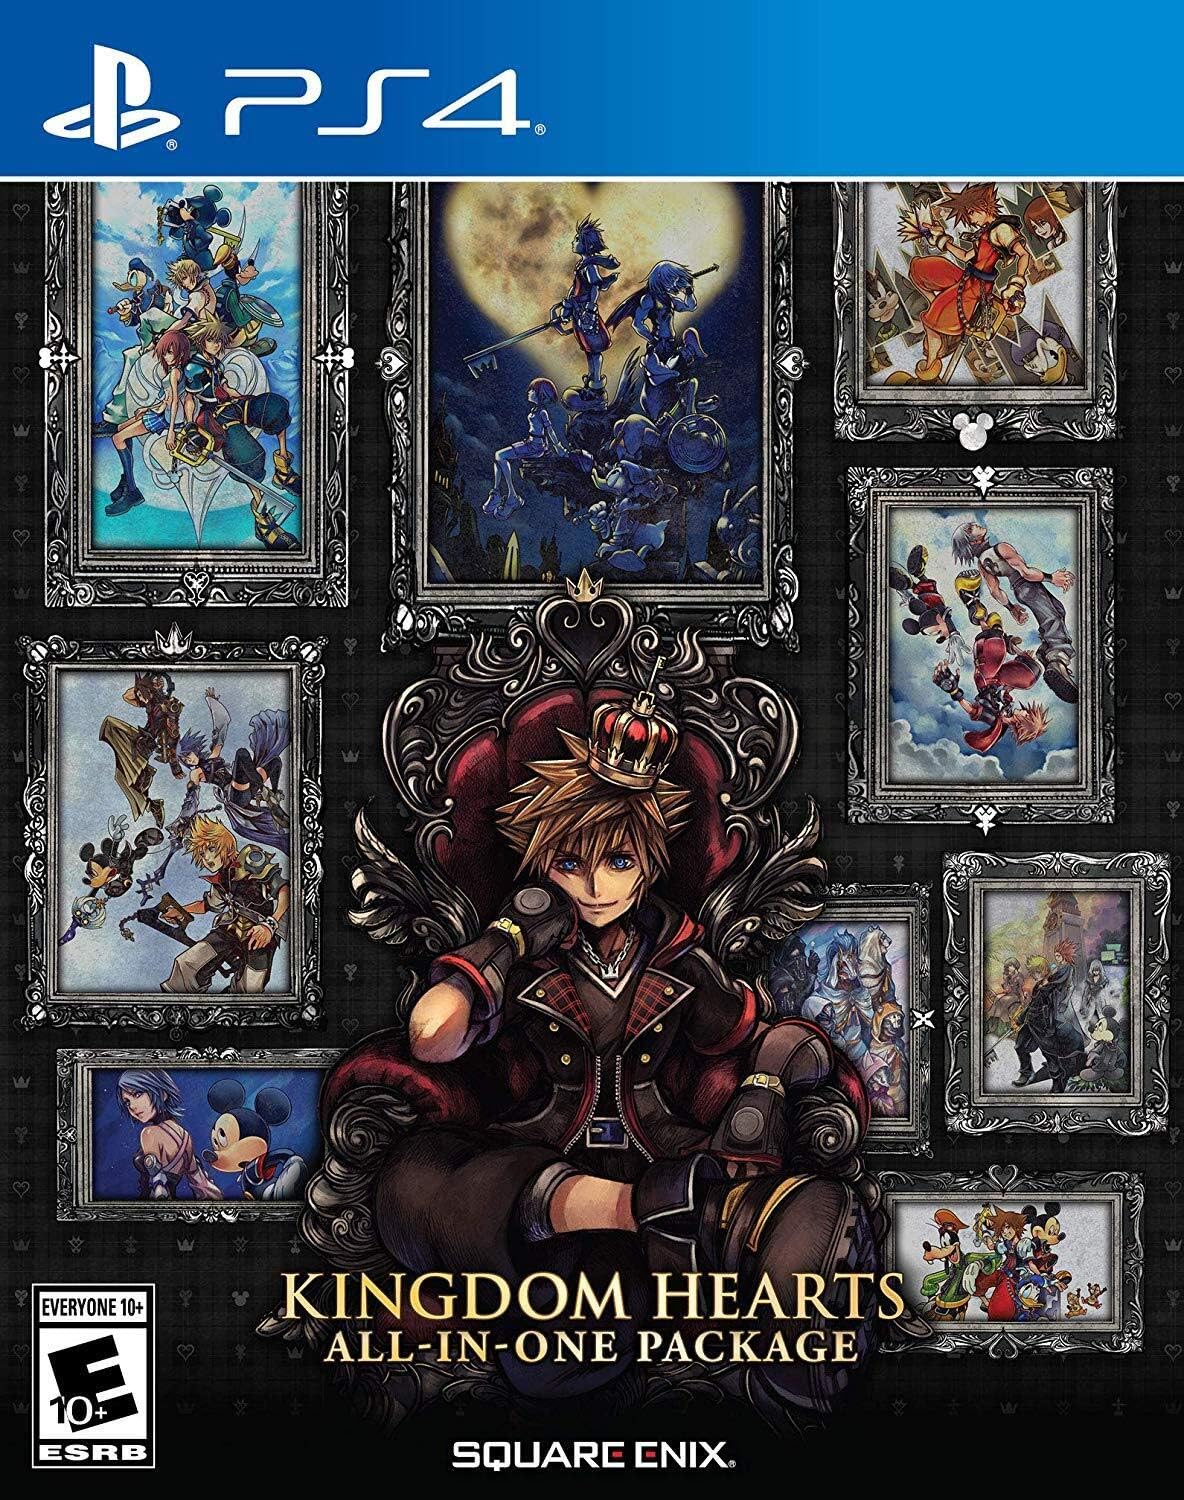 KINGDOM HEARTS ALL IN ONE PACKAGE - Playstation 4